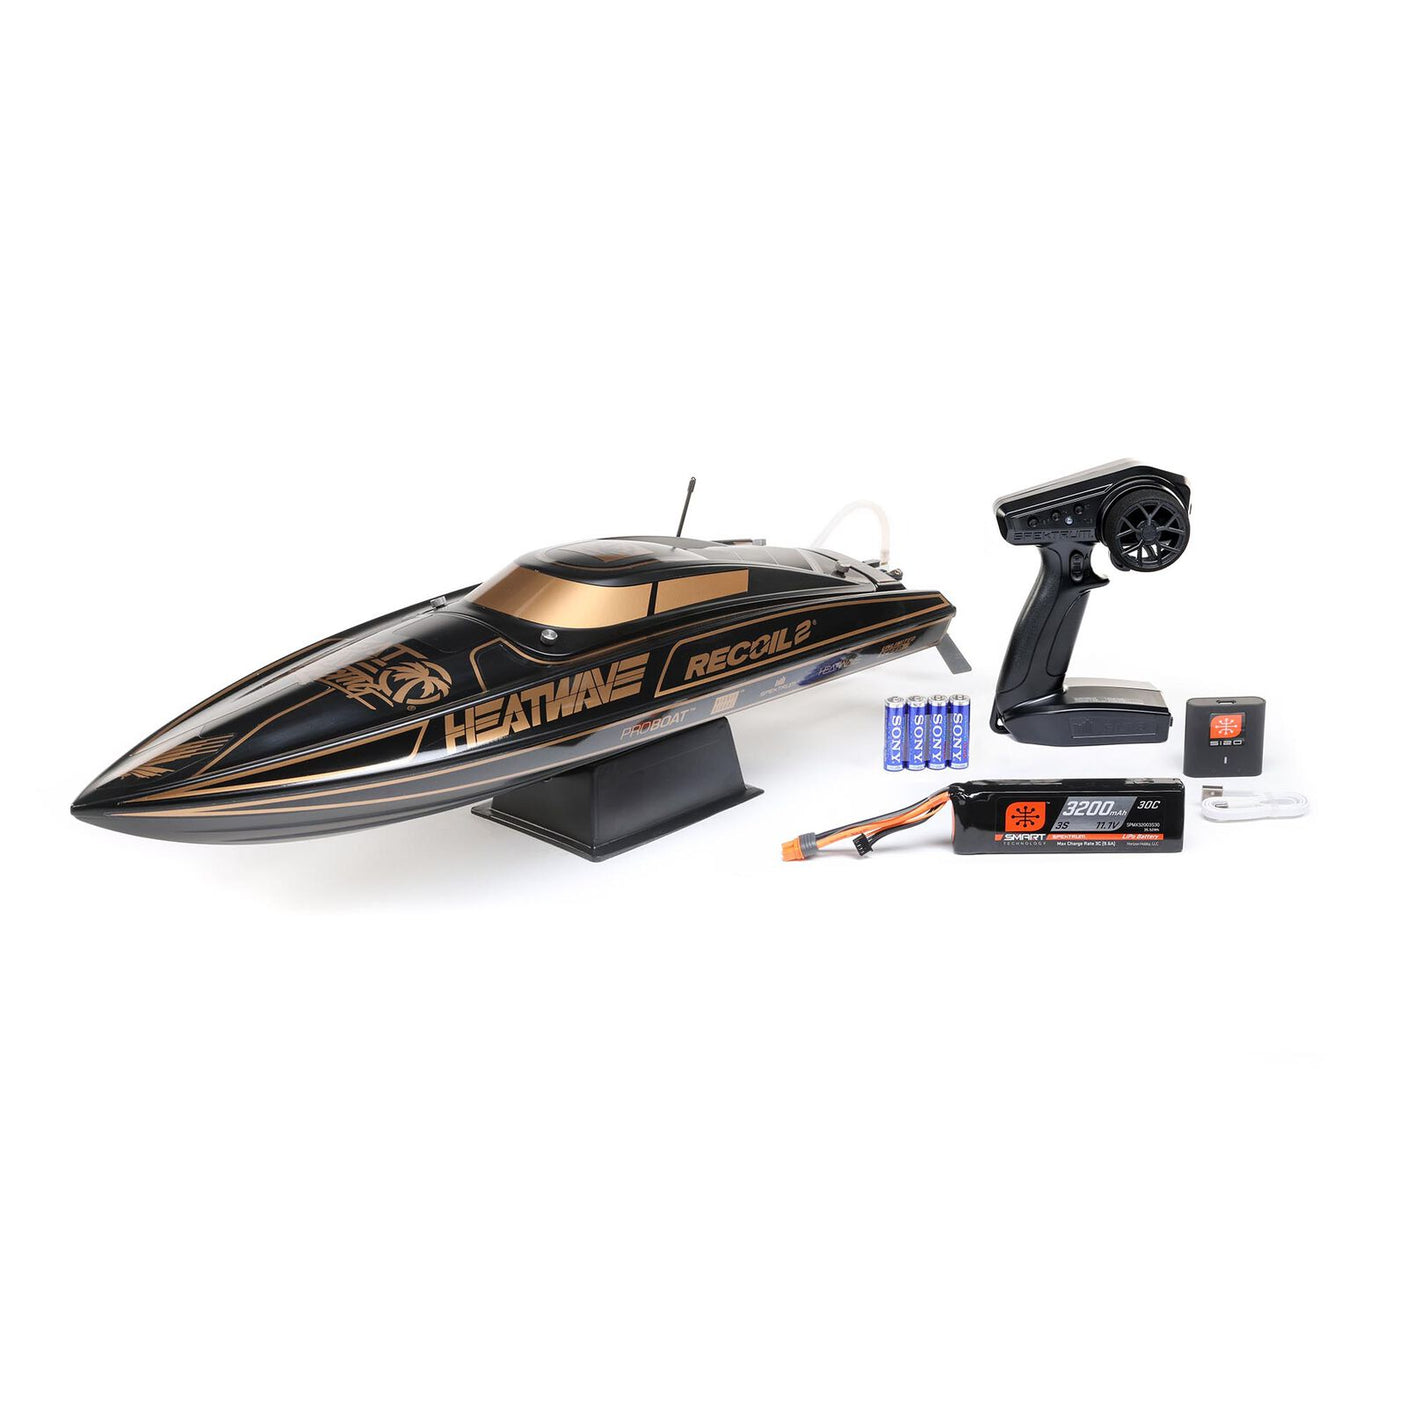 PROBOAT - Recoil 2 V2 18" Self-Righting Brushless Deep-V RTR - Heat Wave Visual